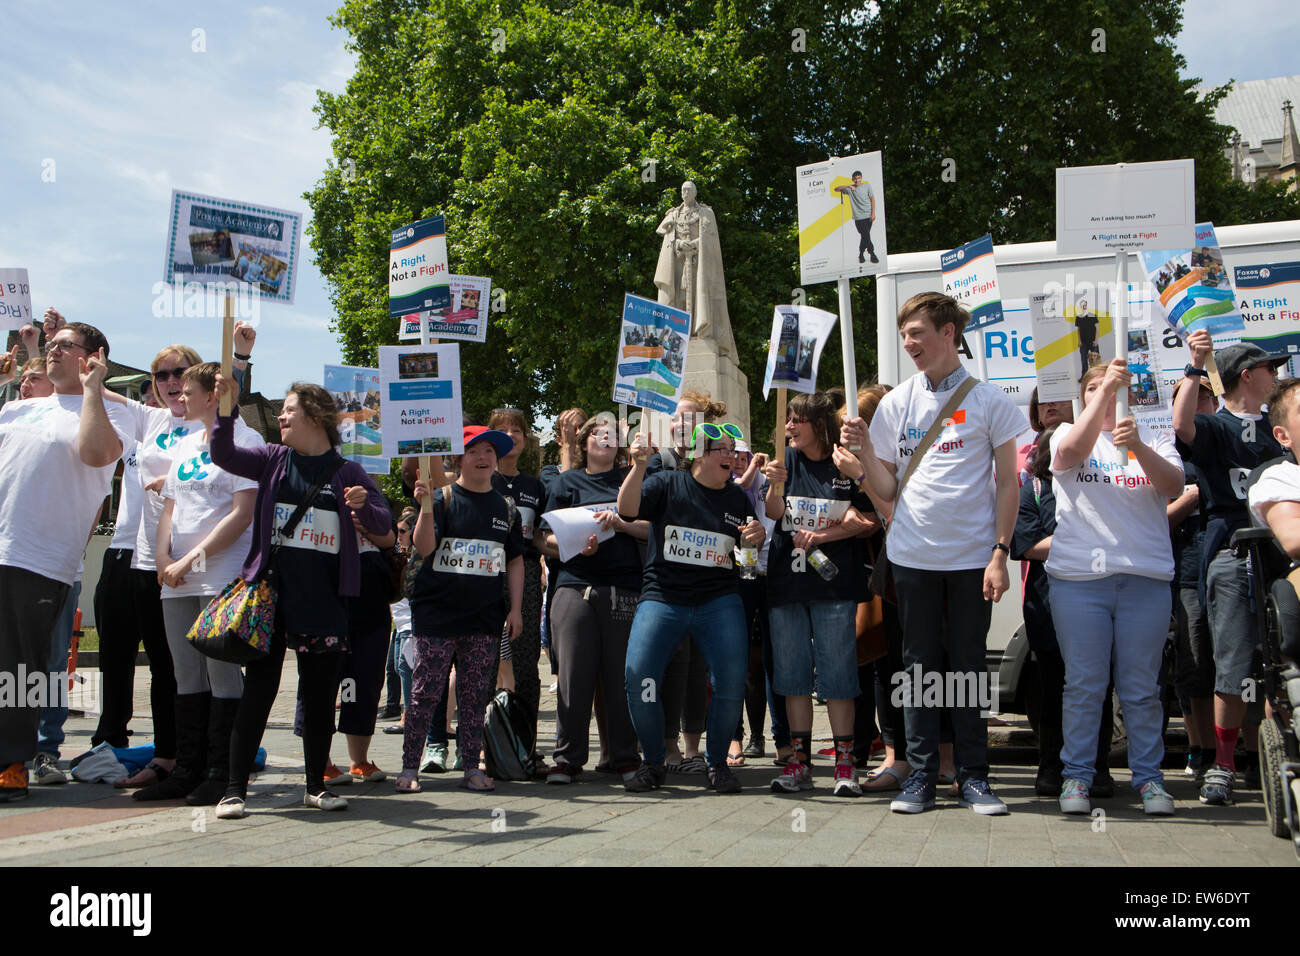 Protesters gather to support 'A Right Not a Fight,' campaign in Westminster, London. Stock Photo